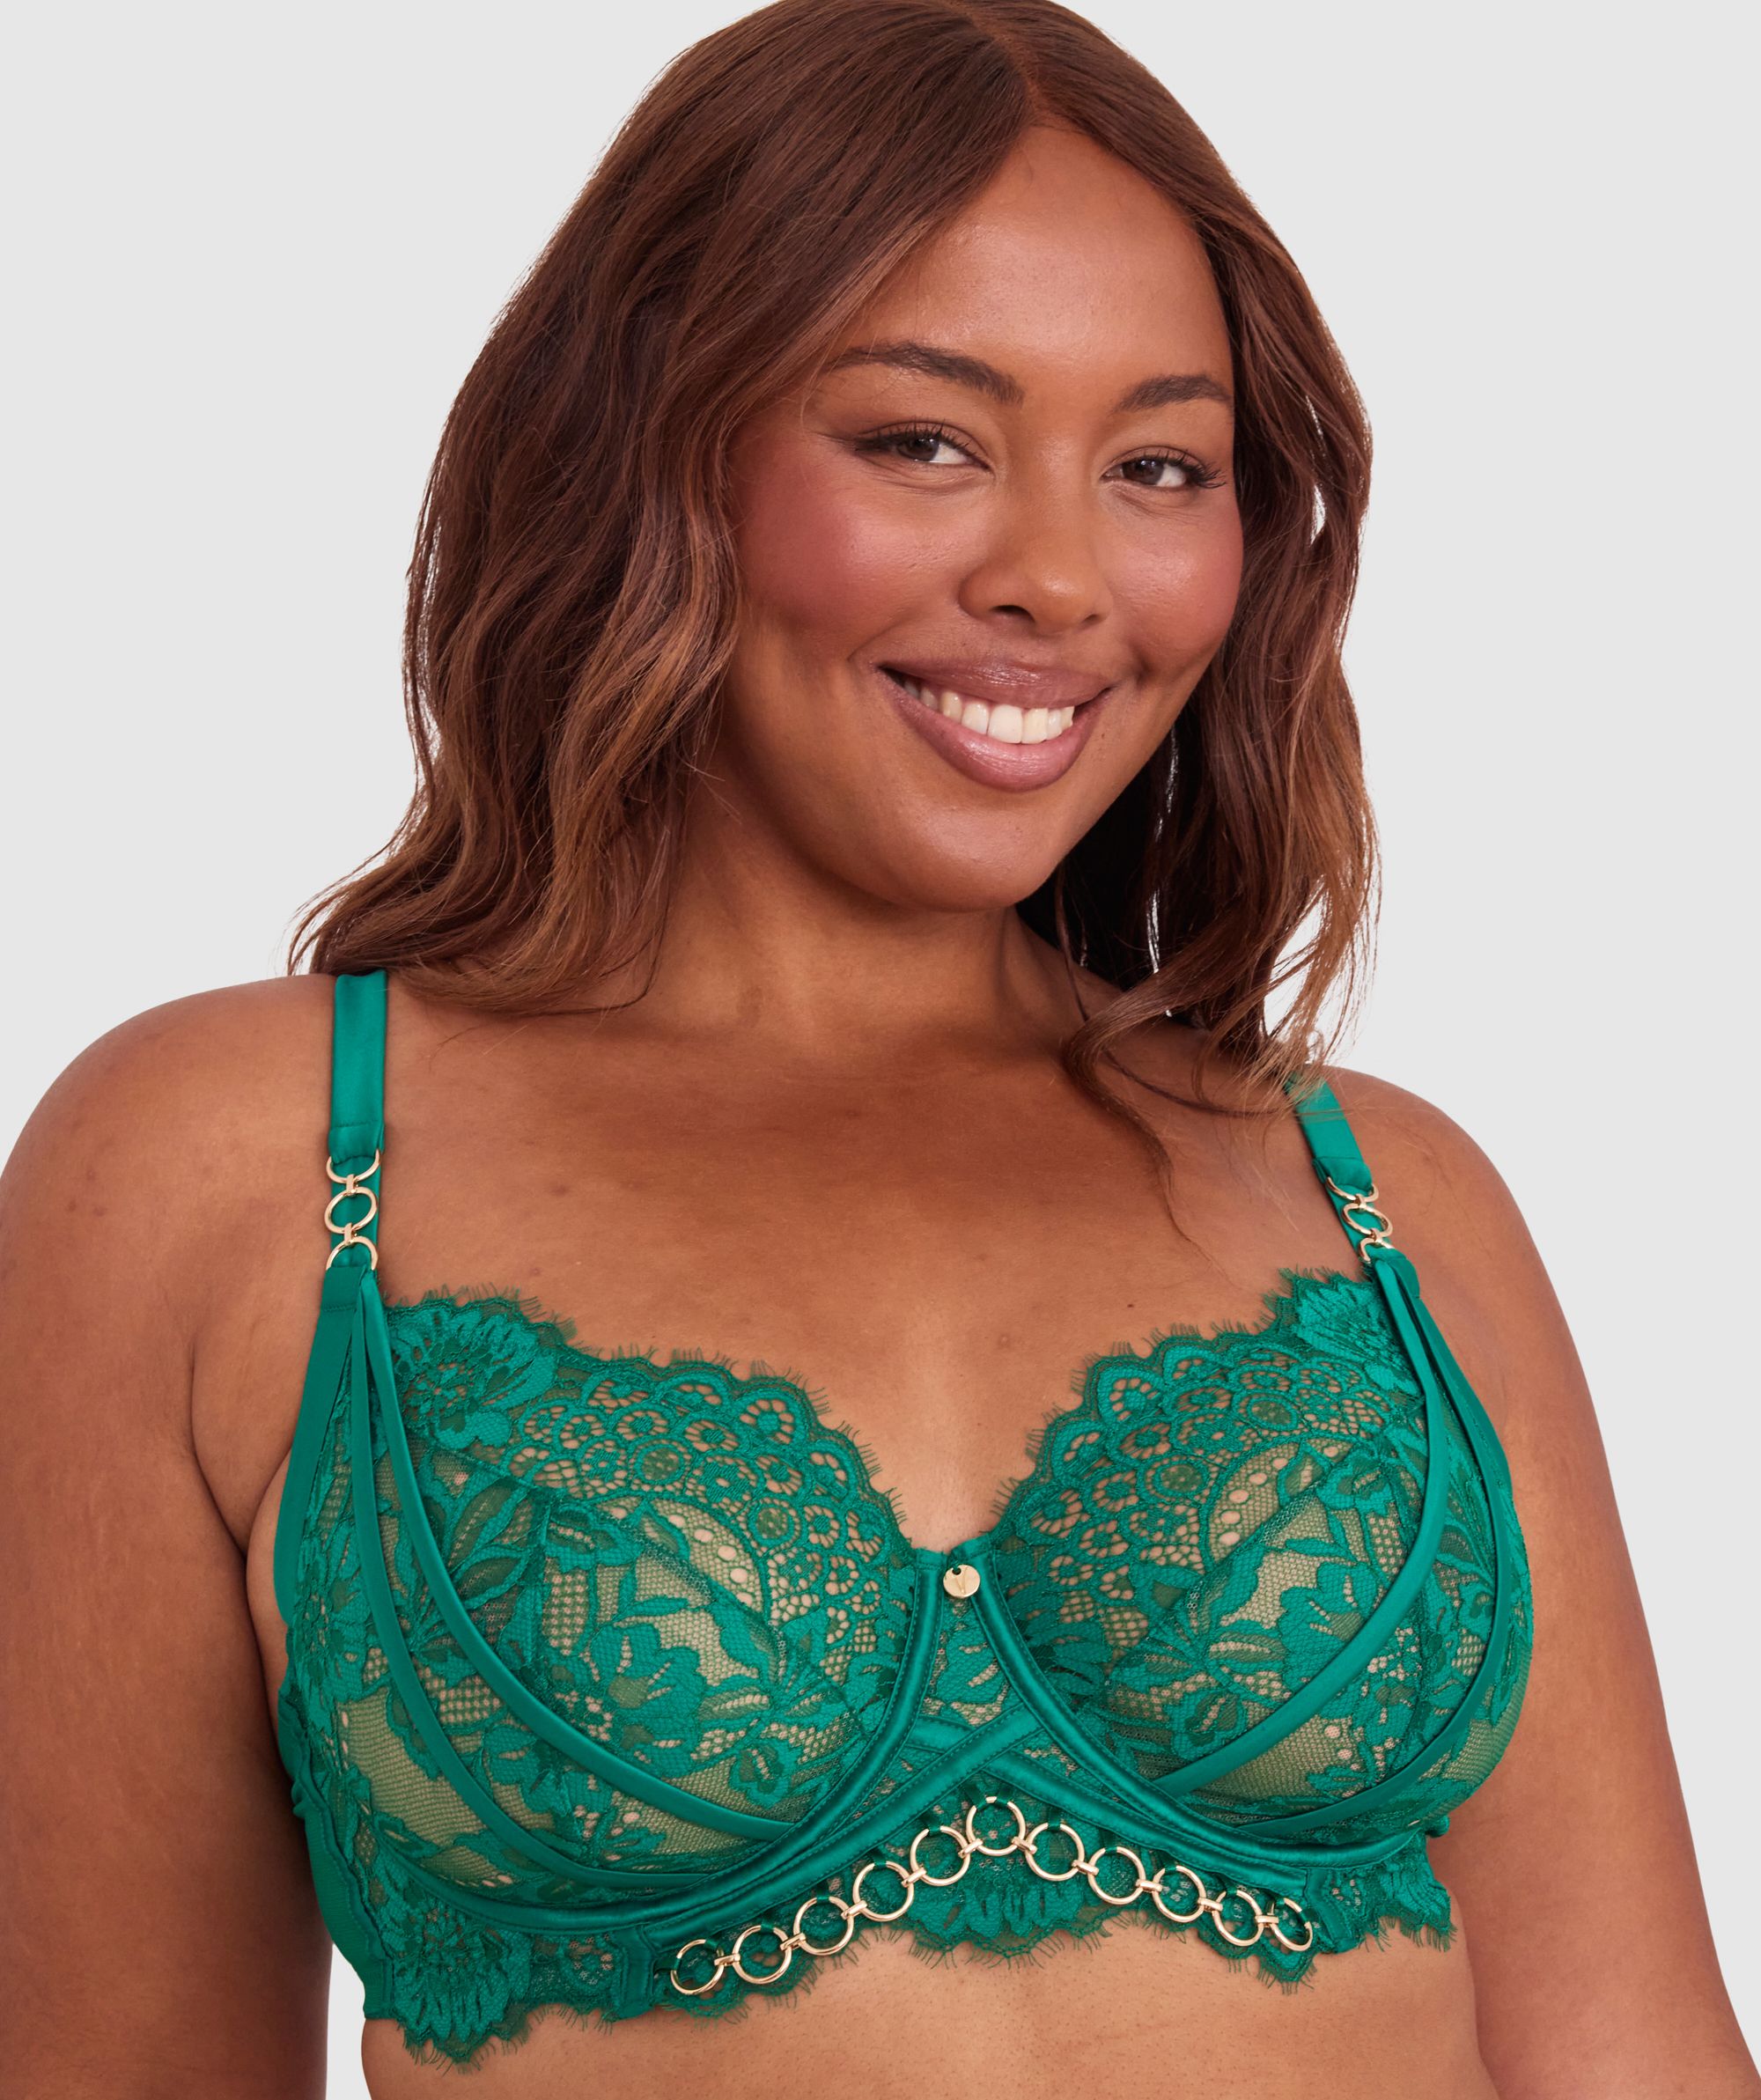 Crossover Bra w/Lace Cups